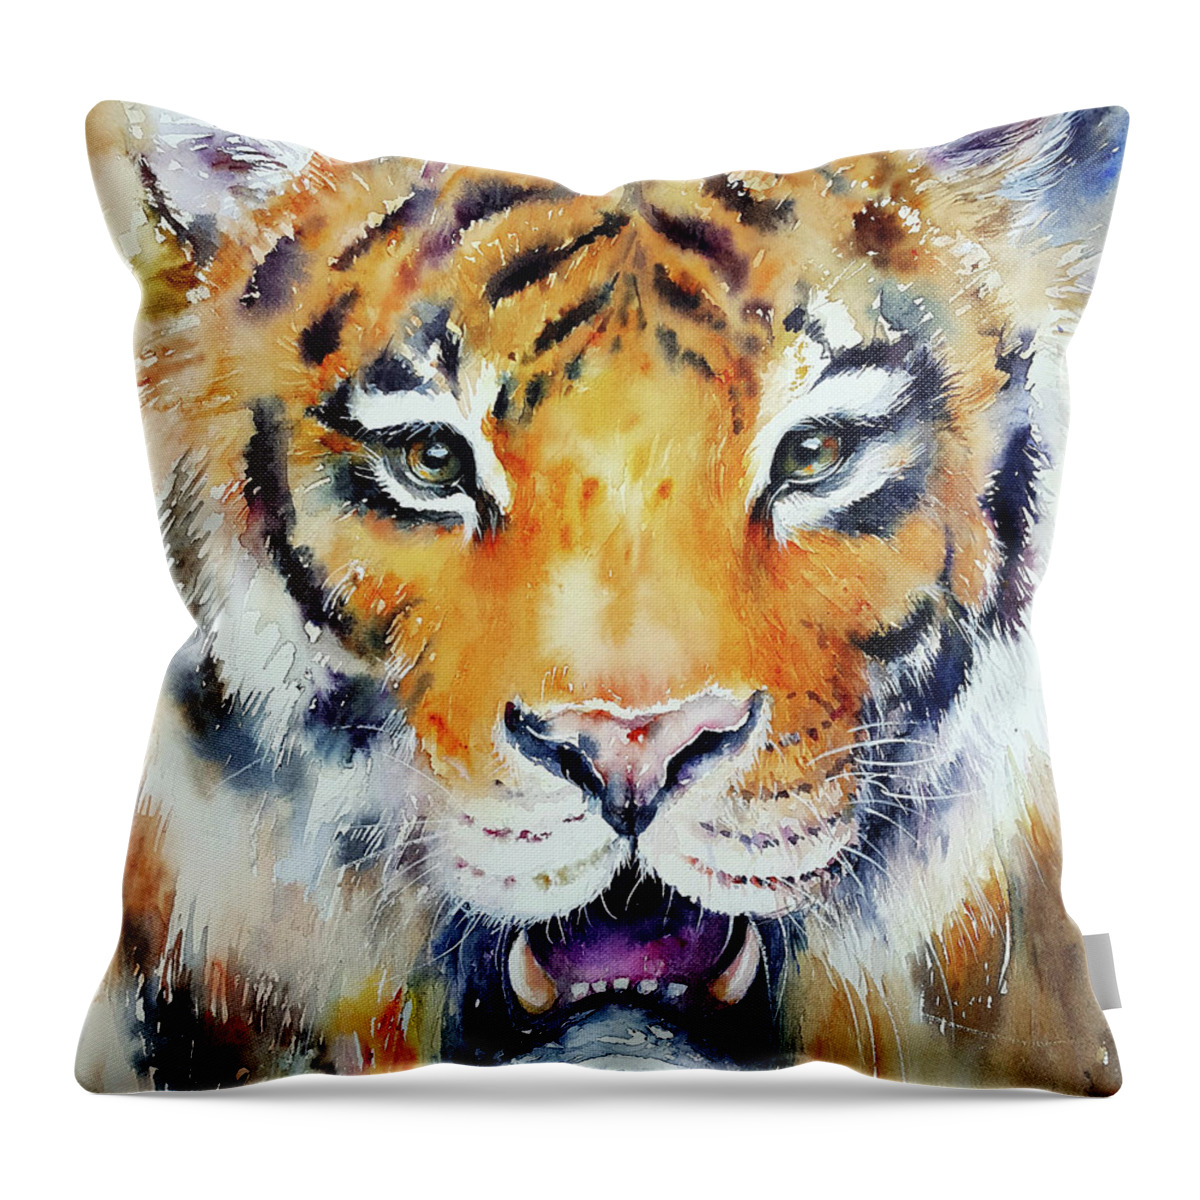 Tiger Throw Pillow featuring the painting Caesar by Arti Chauhan